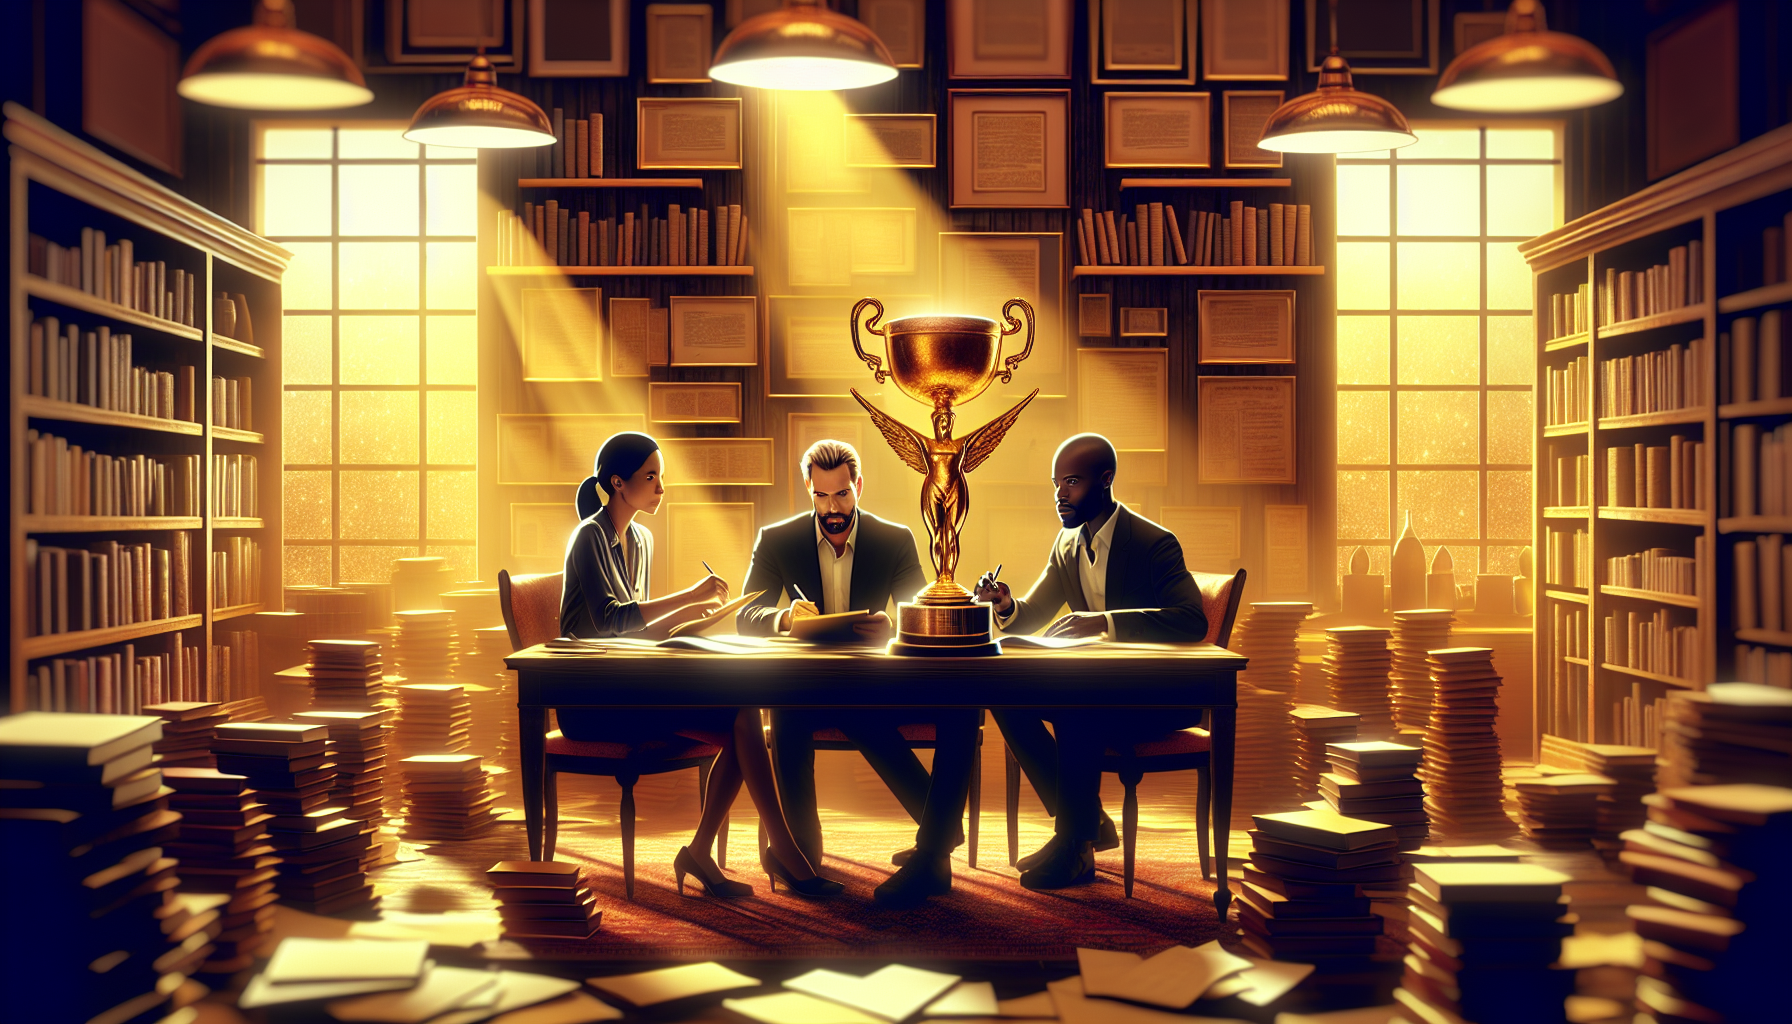 An elegant, vintage-inspired office with scattered screenplays and a golden trophy, depicting three diverse screenwriters in deep discussion under a soft, warm light.